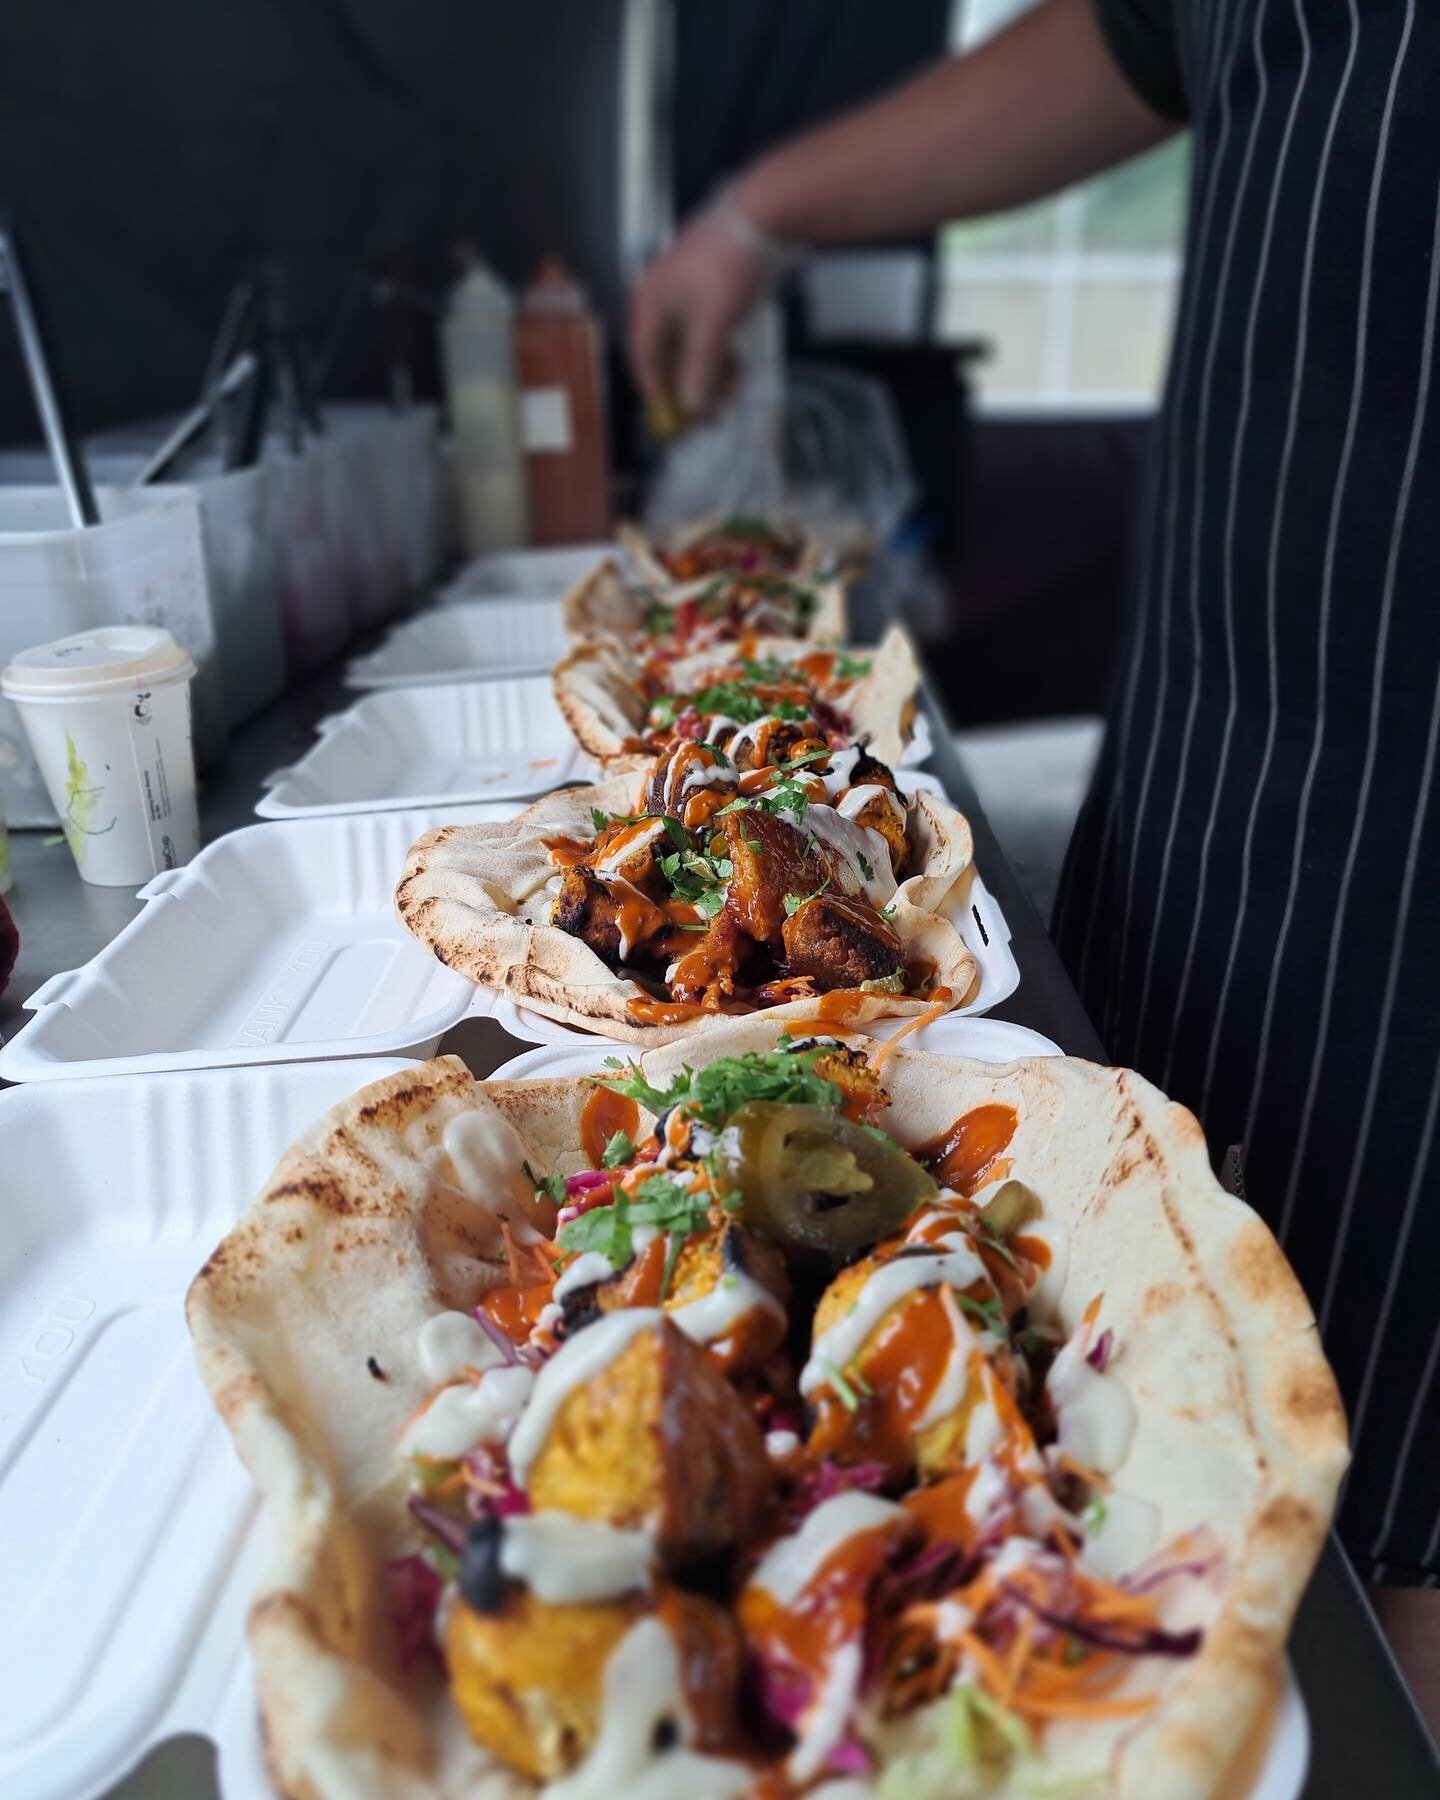 @triggfood will be making their debut at The Oxford Arms tomorrow! Join us for our Desert Islands Discs event and some delicious kebabs!

#openarmskington #communityhub #communitypub #popupkitchen #supportlocal #welovekington #herefordshire #kingtonh